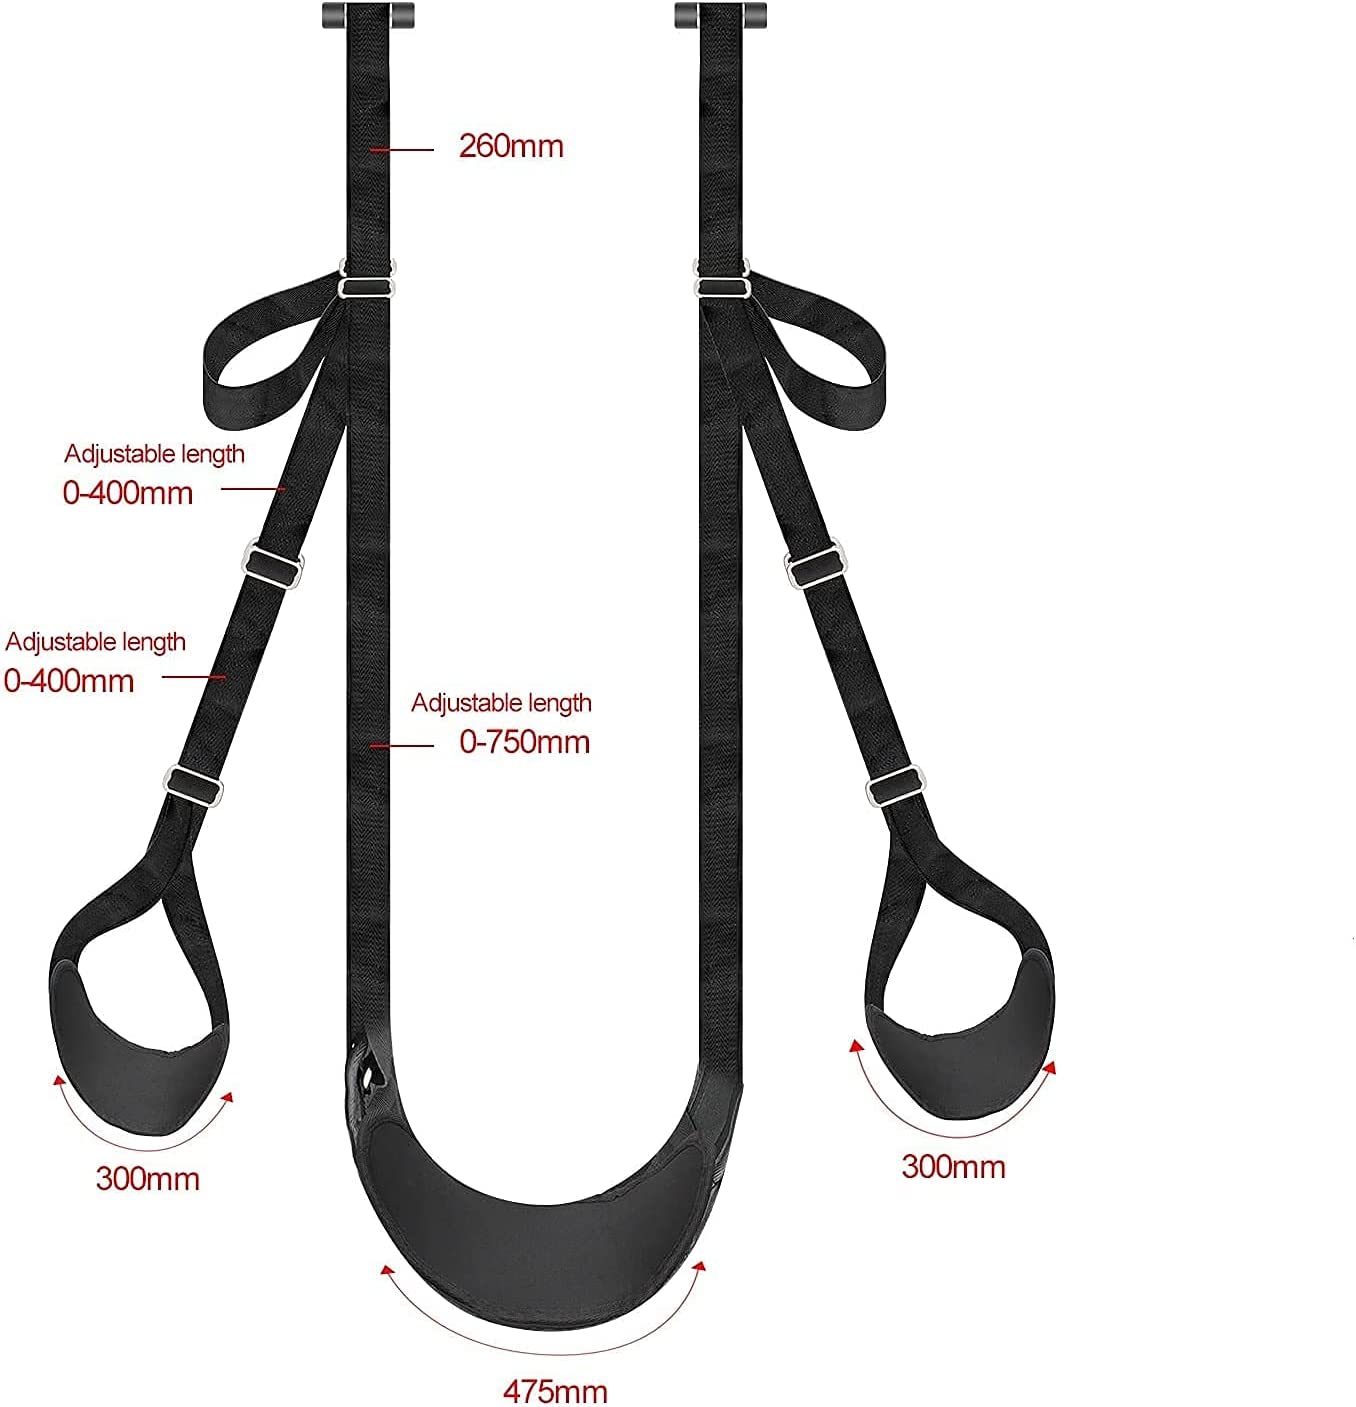 Door Sex Swing with Seat, Gift: Reuse Finger Cots, Sexy Slave Bondage Love Slings Restraints Toys SM Game BDSM for Adult Couples with Adjustable Straps, Holds up to 300lbs